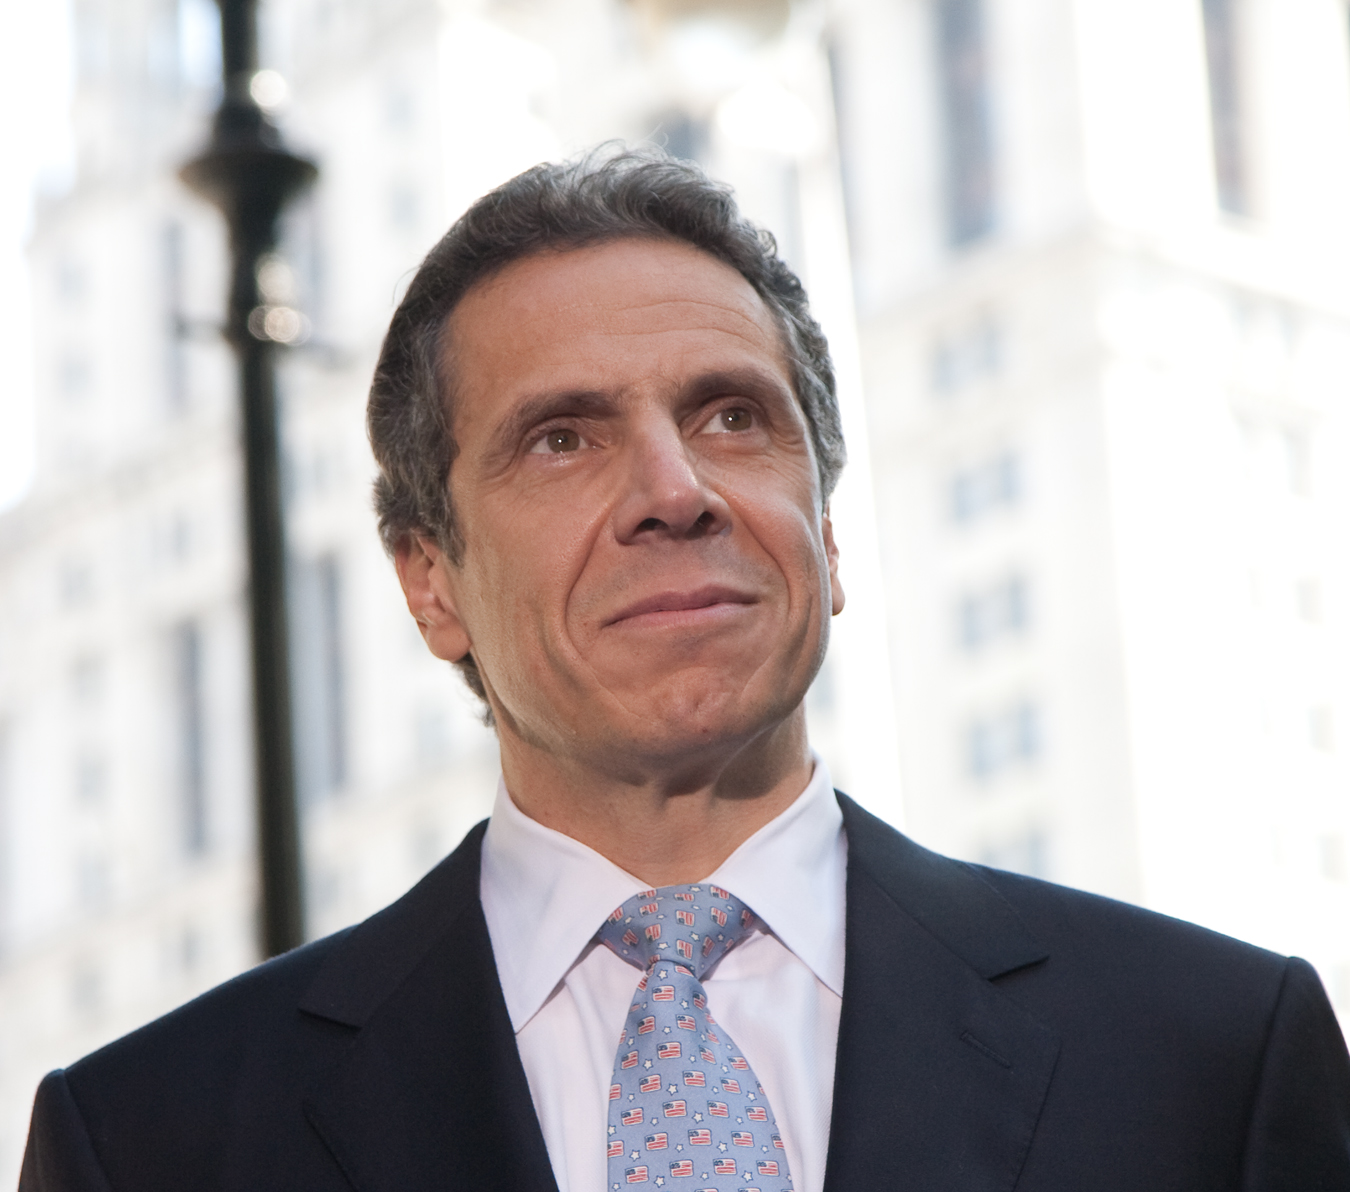 Andrew Cuomo Says The Threat Is Not Going Away Until A Vaccine Develops